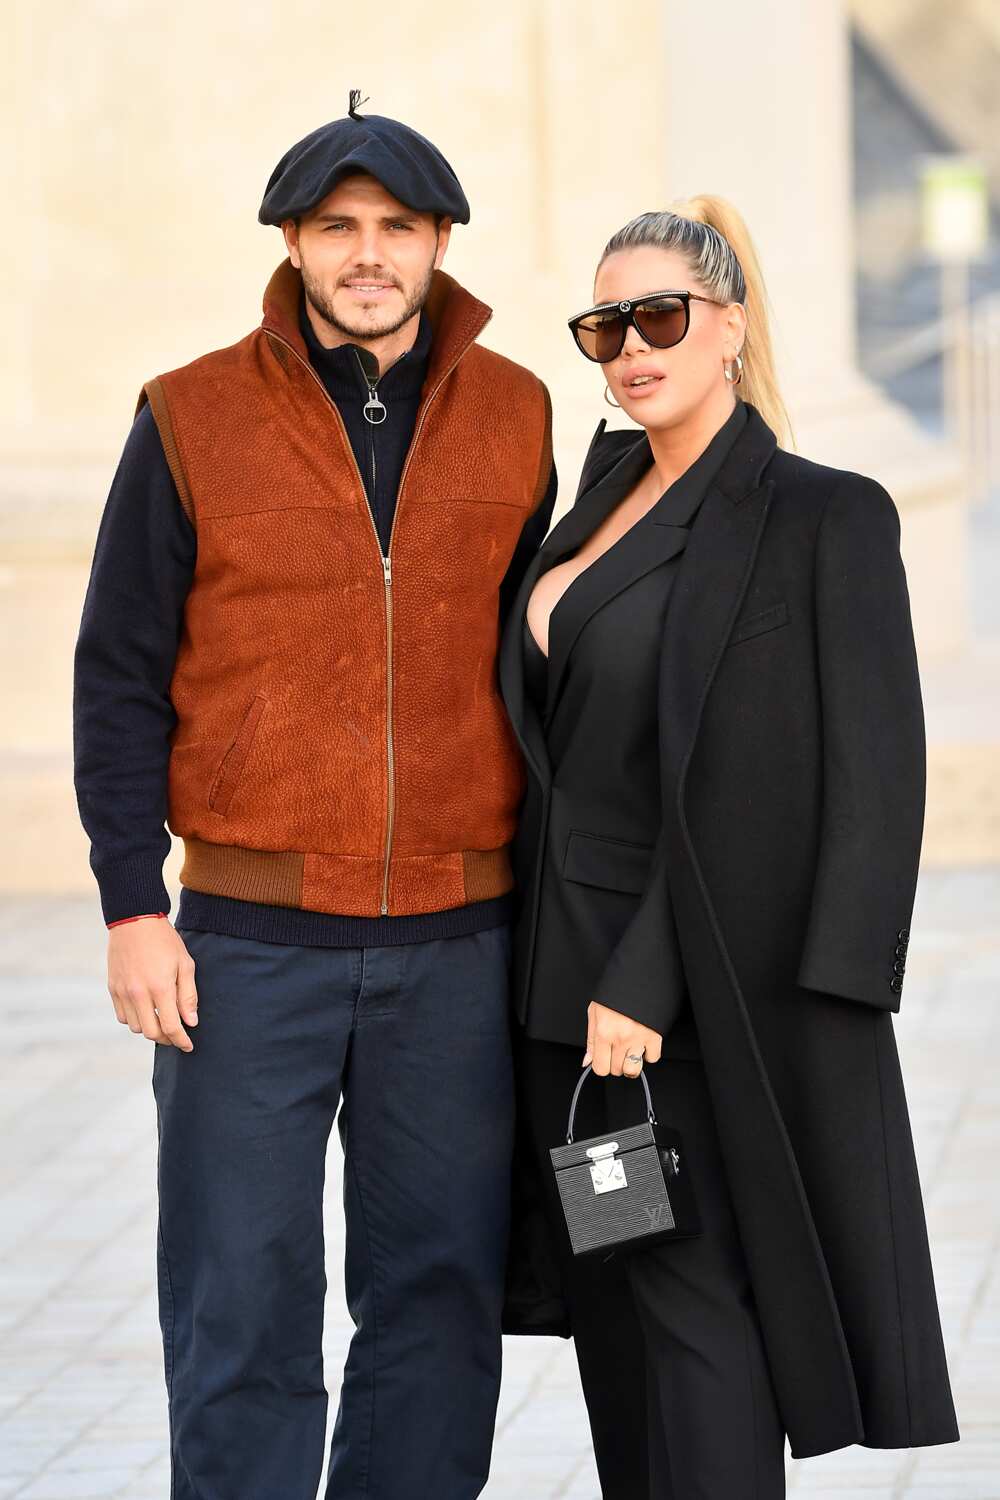 Wanda Nara et son conjoint Mauro Icardi
Photo by Jacopo Raule/Getty Images